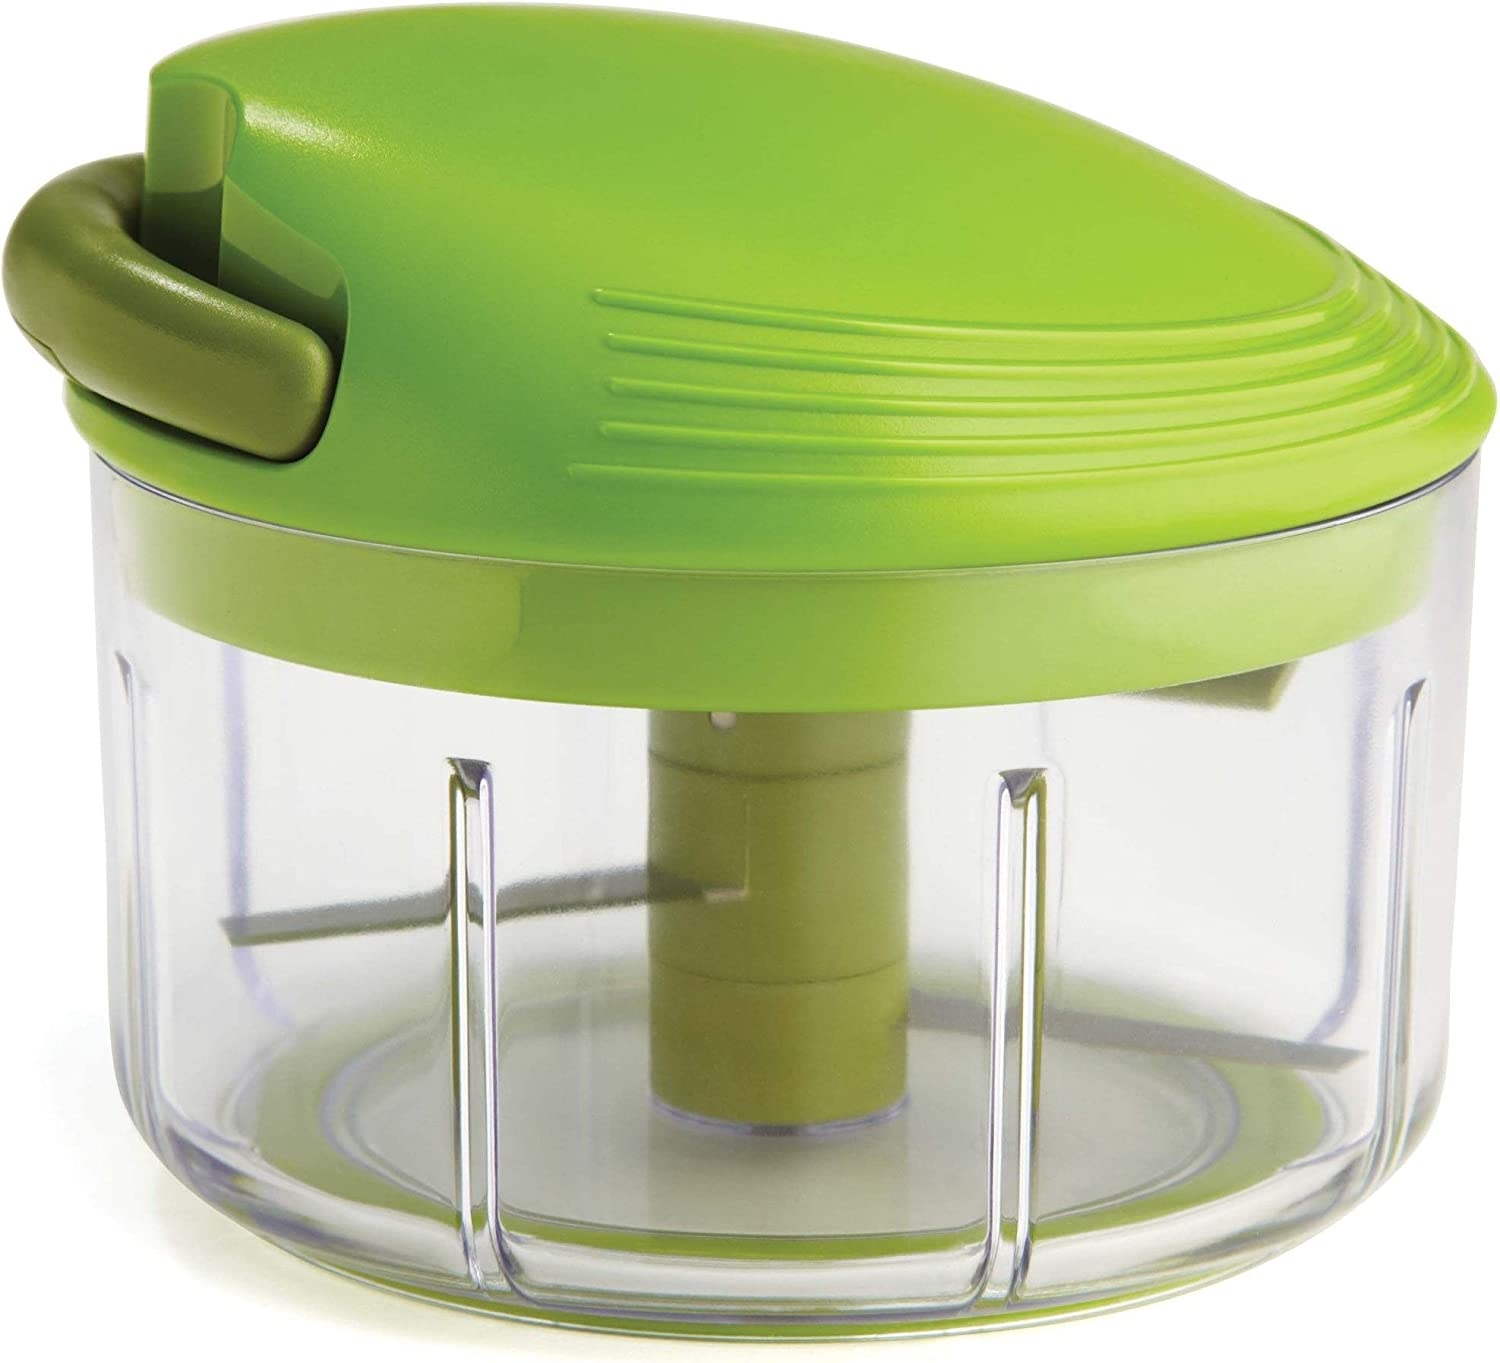 Kuhn Rikon Pull Chop Chopper/Manual Food Processor with Cord Mechanism, Green, 2-Cup Import To Shop ×Product customization